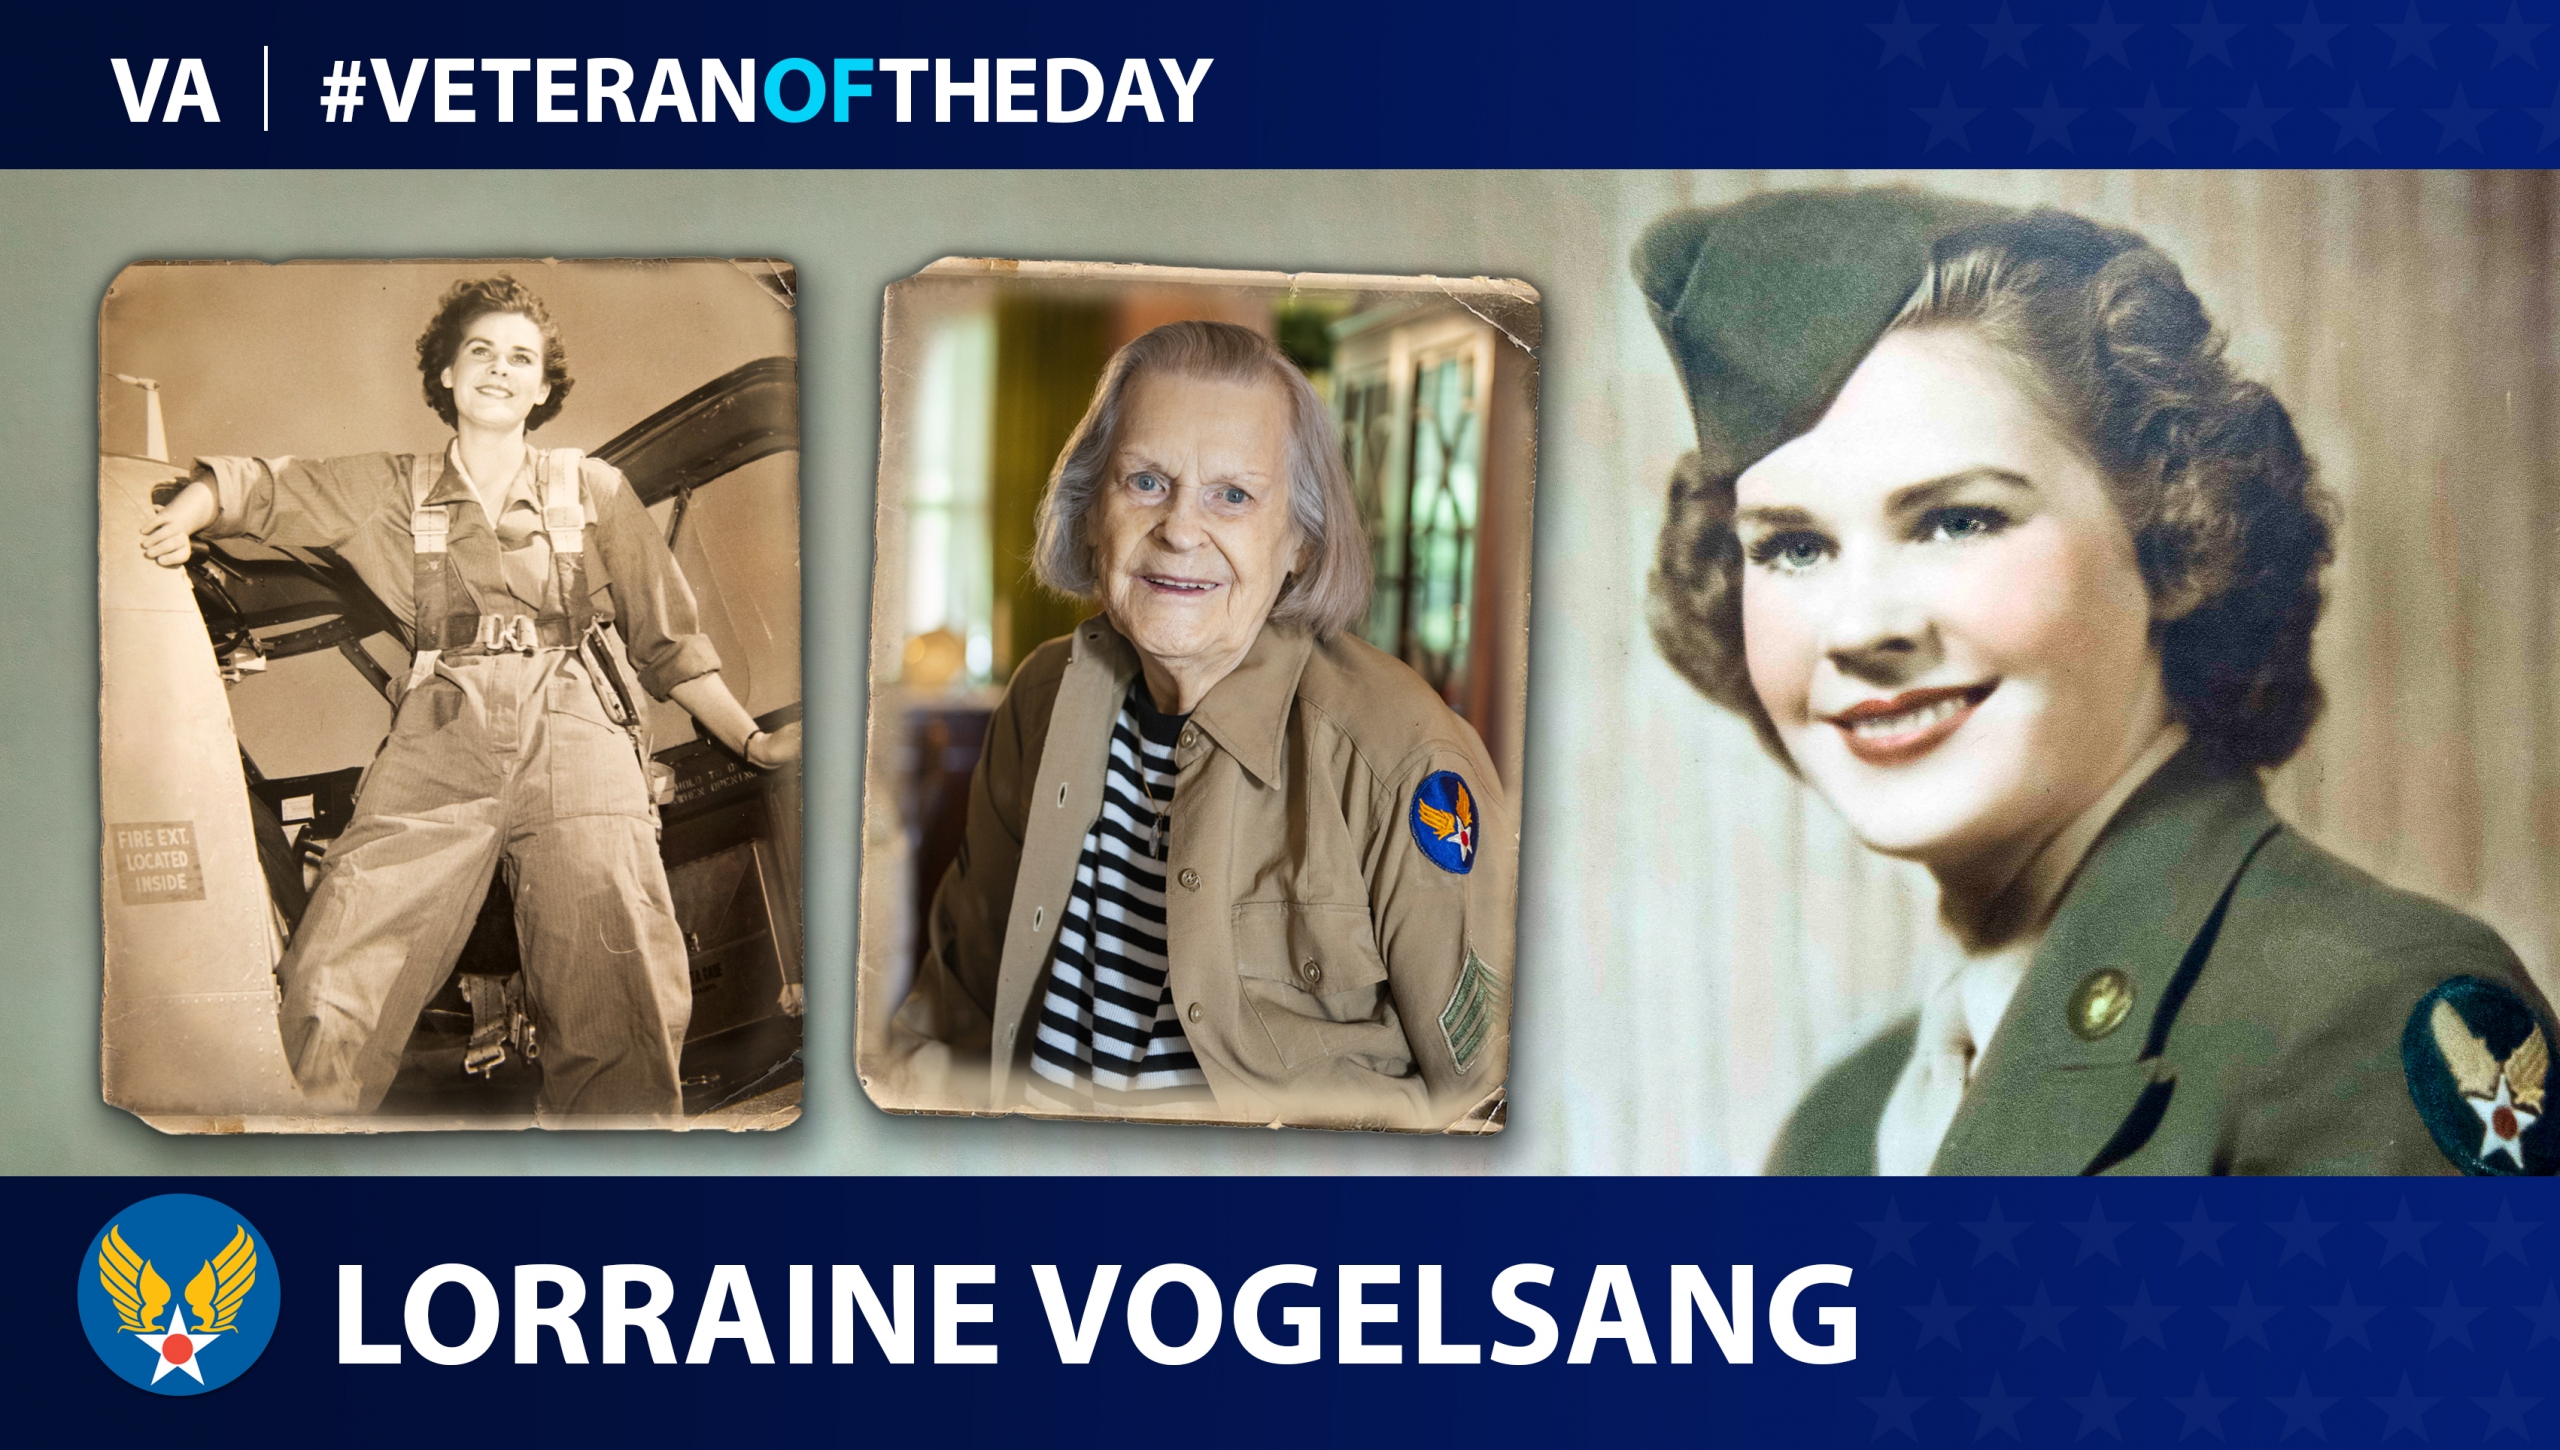 Today’s #VeteranOfTheDay is Army Air Forces Veteran Lorrain Vogelsang, a 100 year old who served as a clerk during World War II.